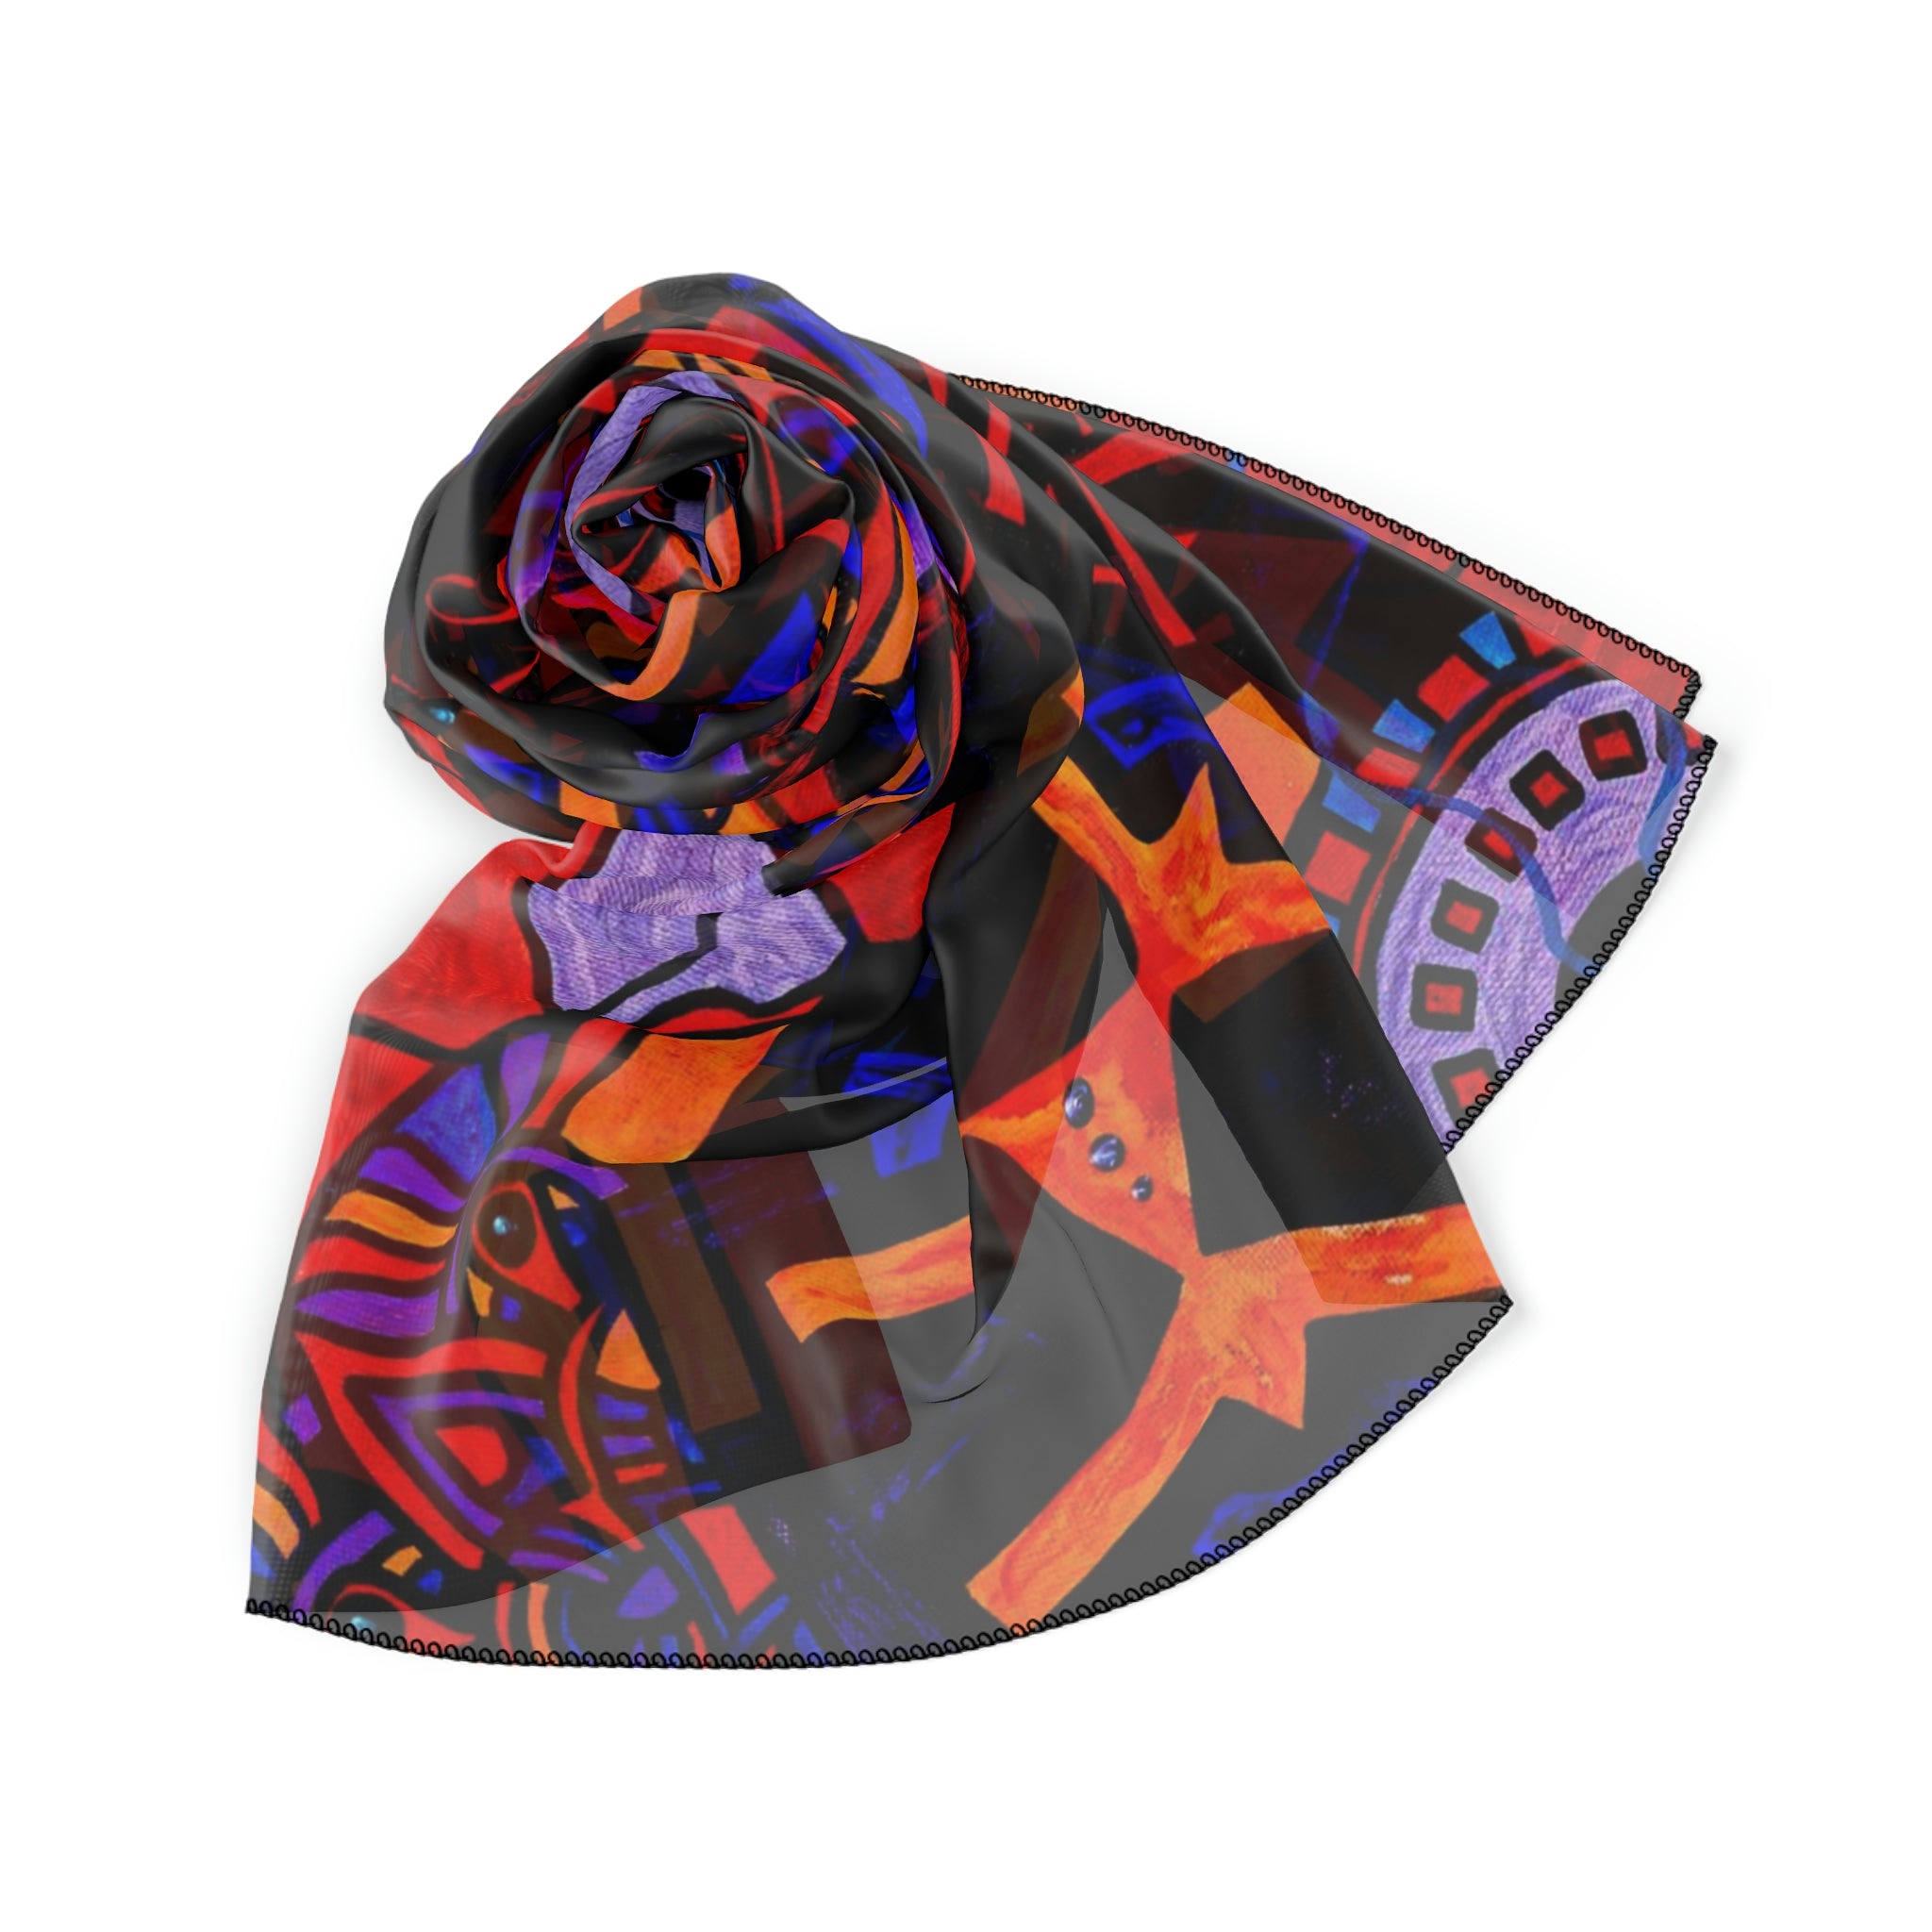 get-the-official-alnilam-strength-grid-frequency-scarf-online-sale_8.jpg